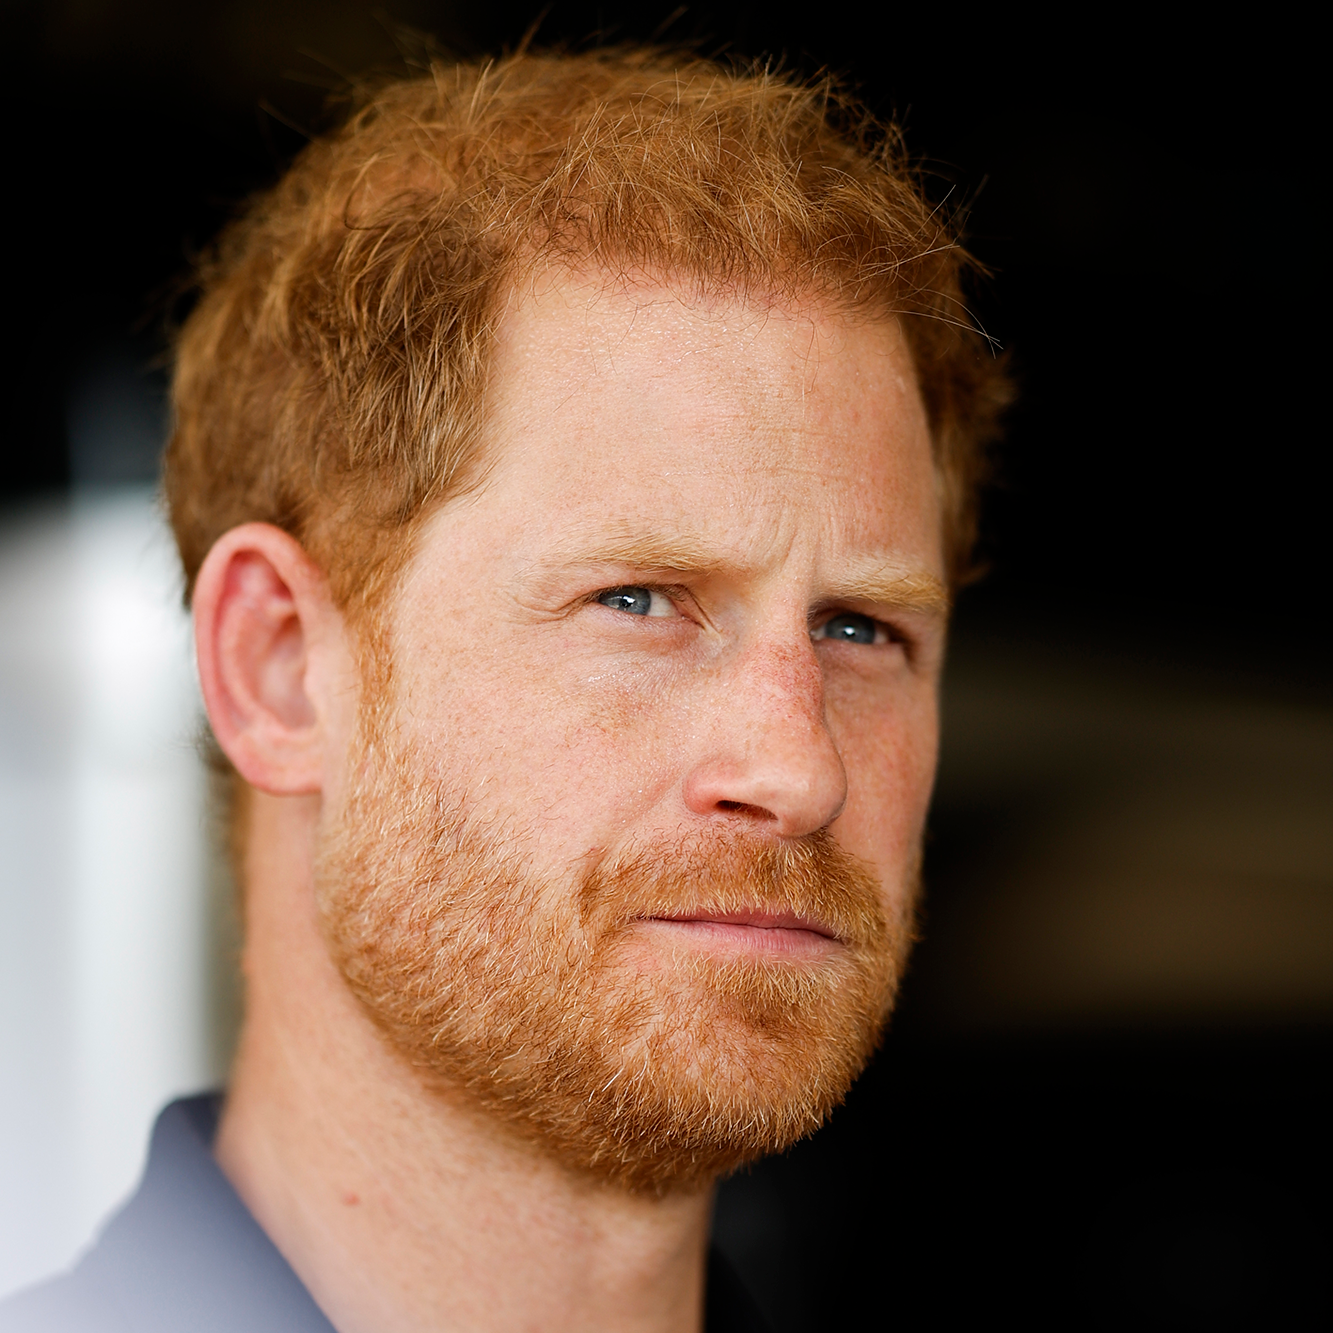 Prince Harry Calls His Victory in a Tabloid Suit “Slaying Dragons”